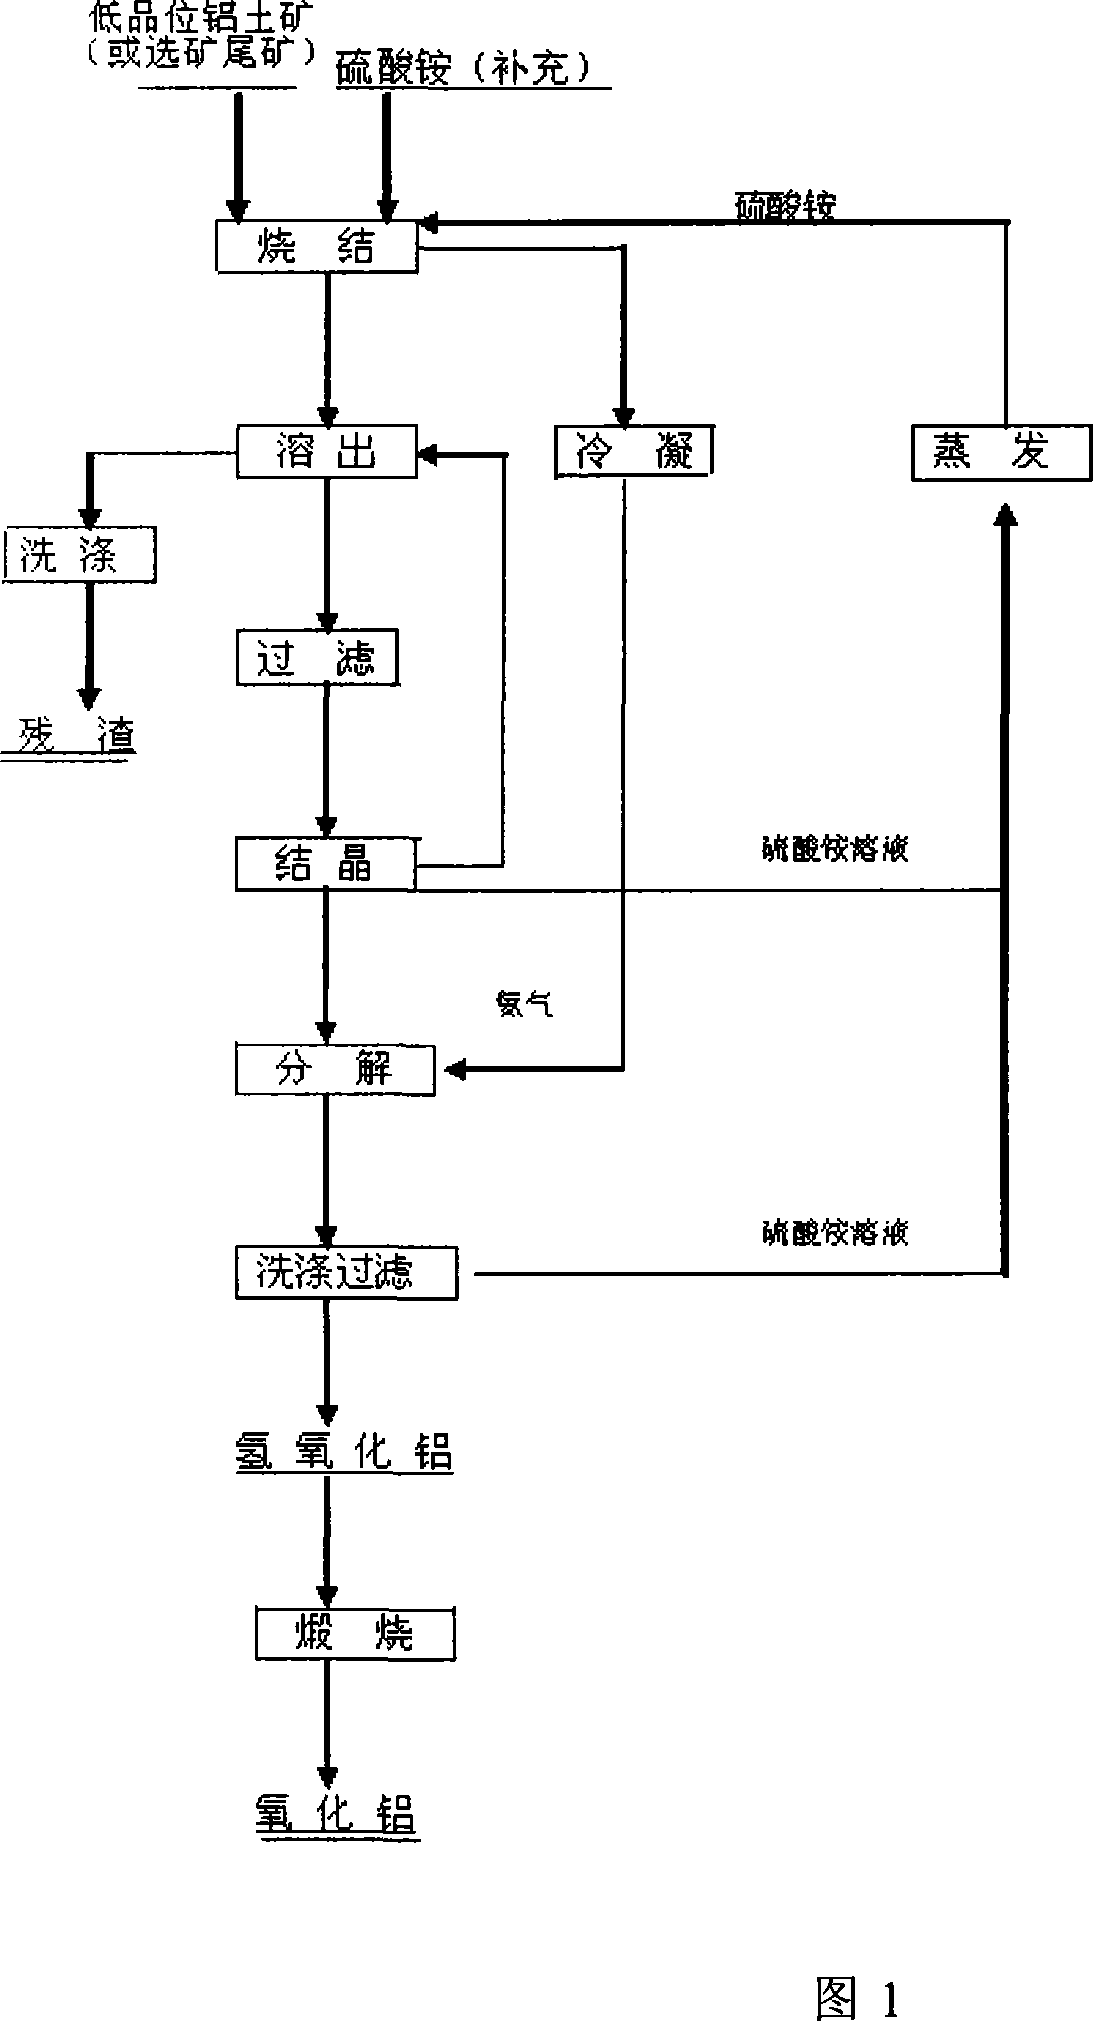 Method for extracting aluminum oxide from low grade bauxite